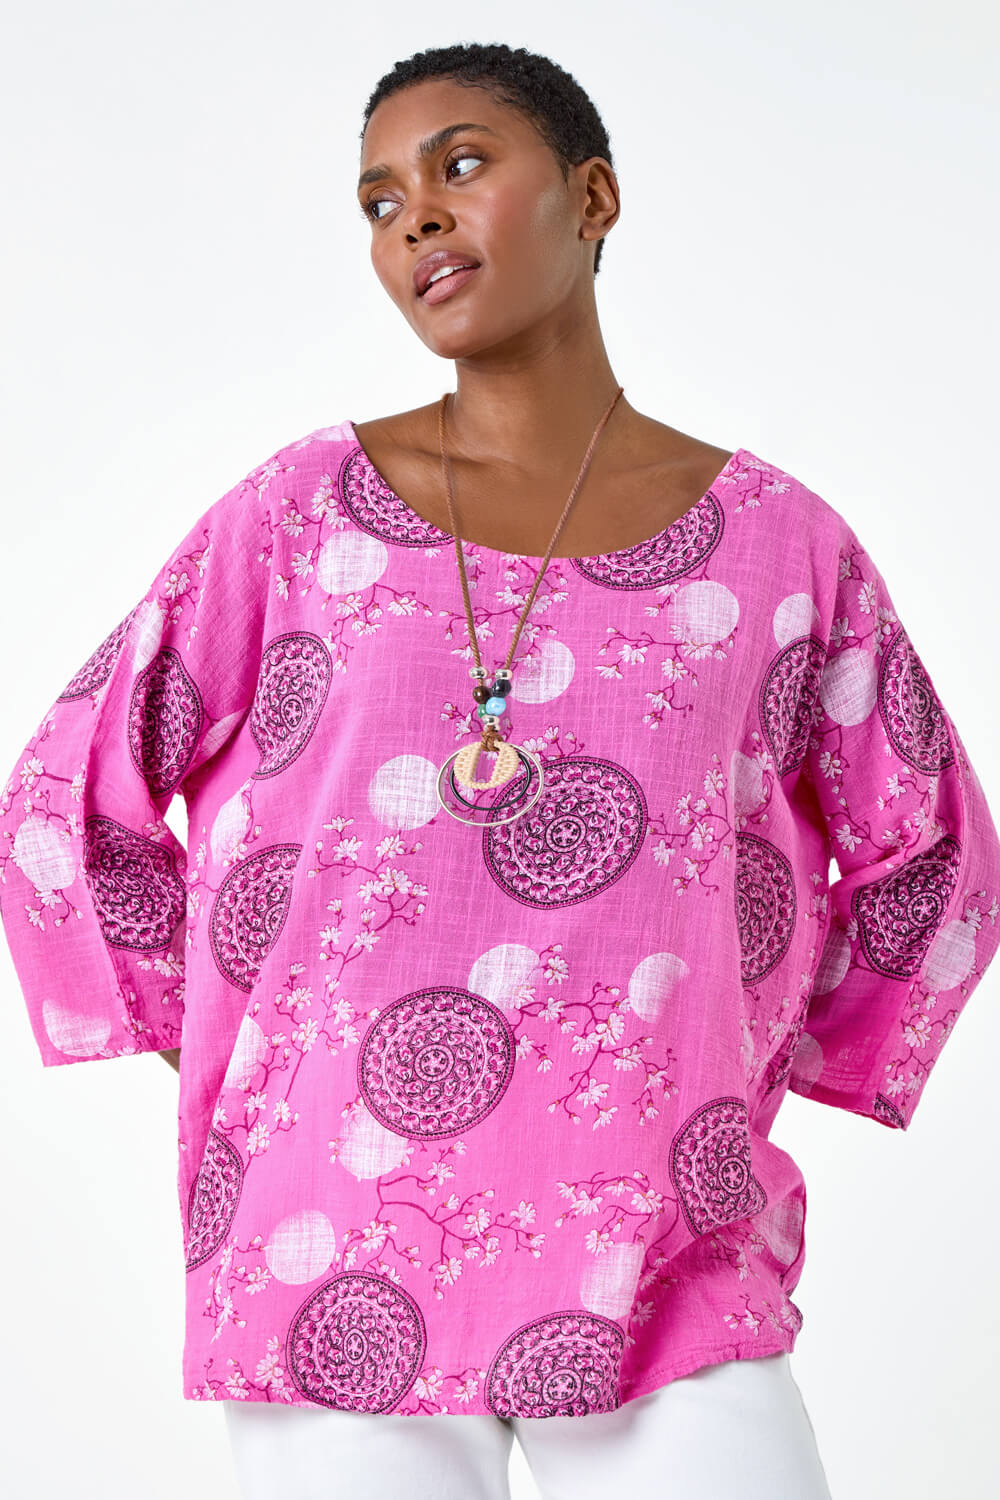 PINK Floral Embroidered Cotton Top with Necklace, Image 2 of 5